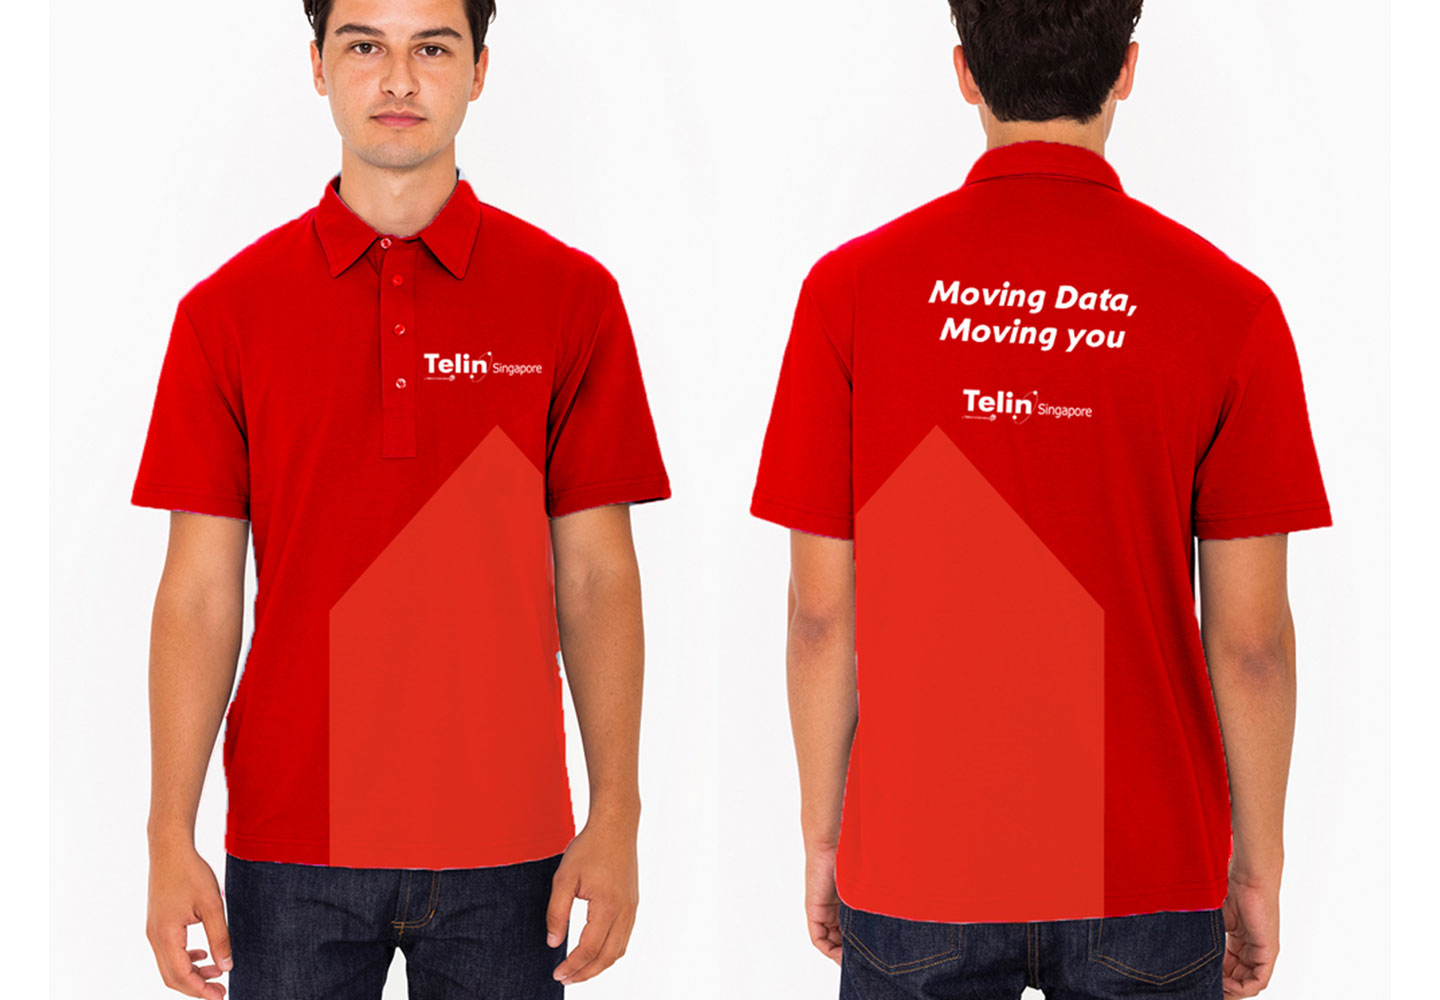 Brand Consultancy in Technology Industry. Uniform design for Telin.